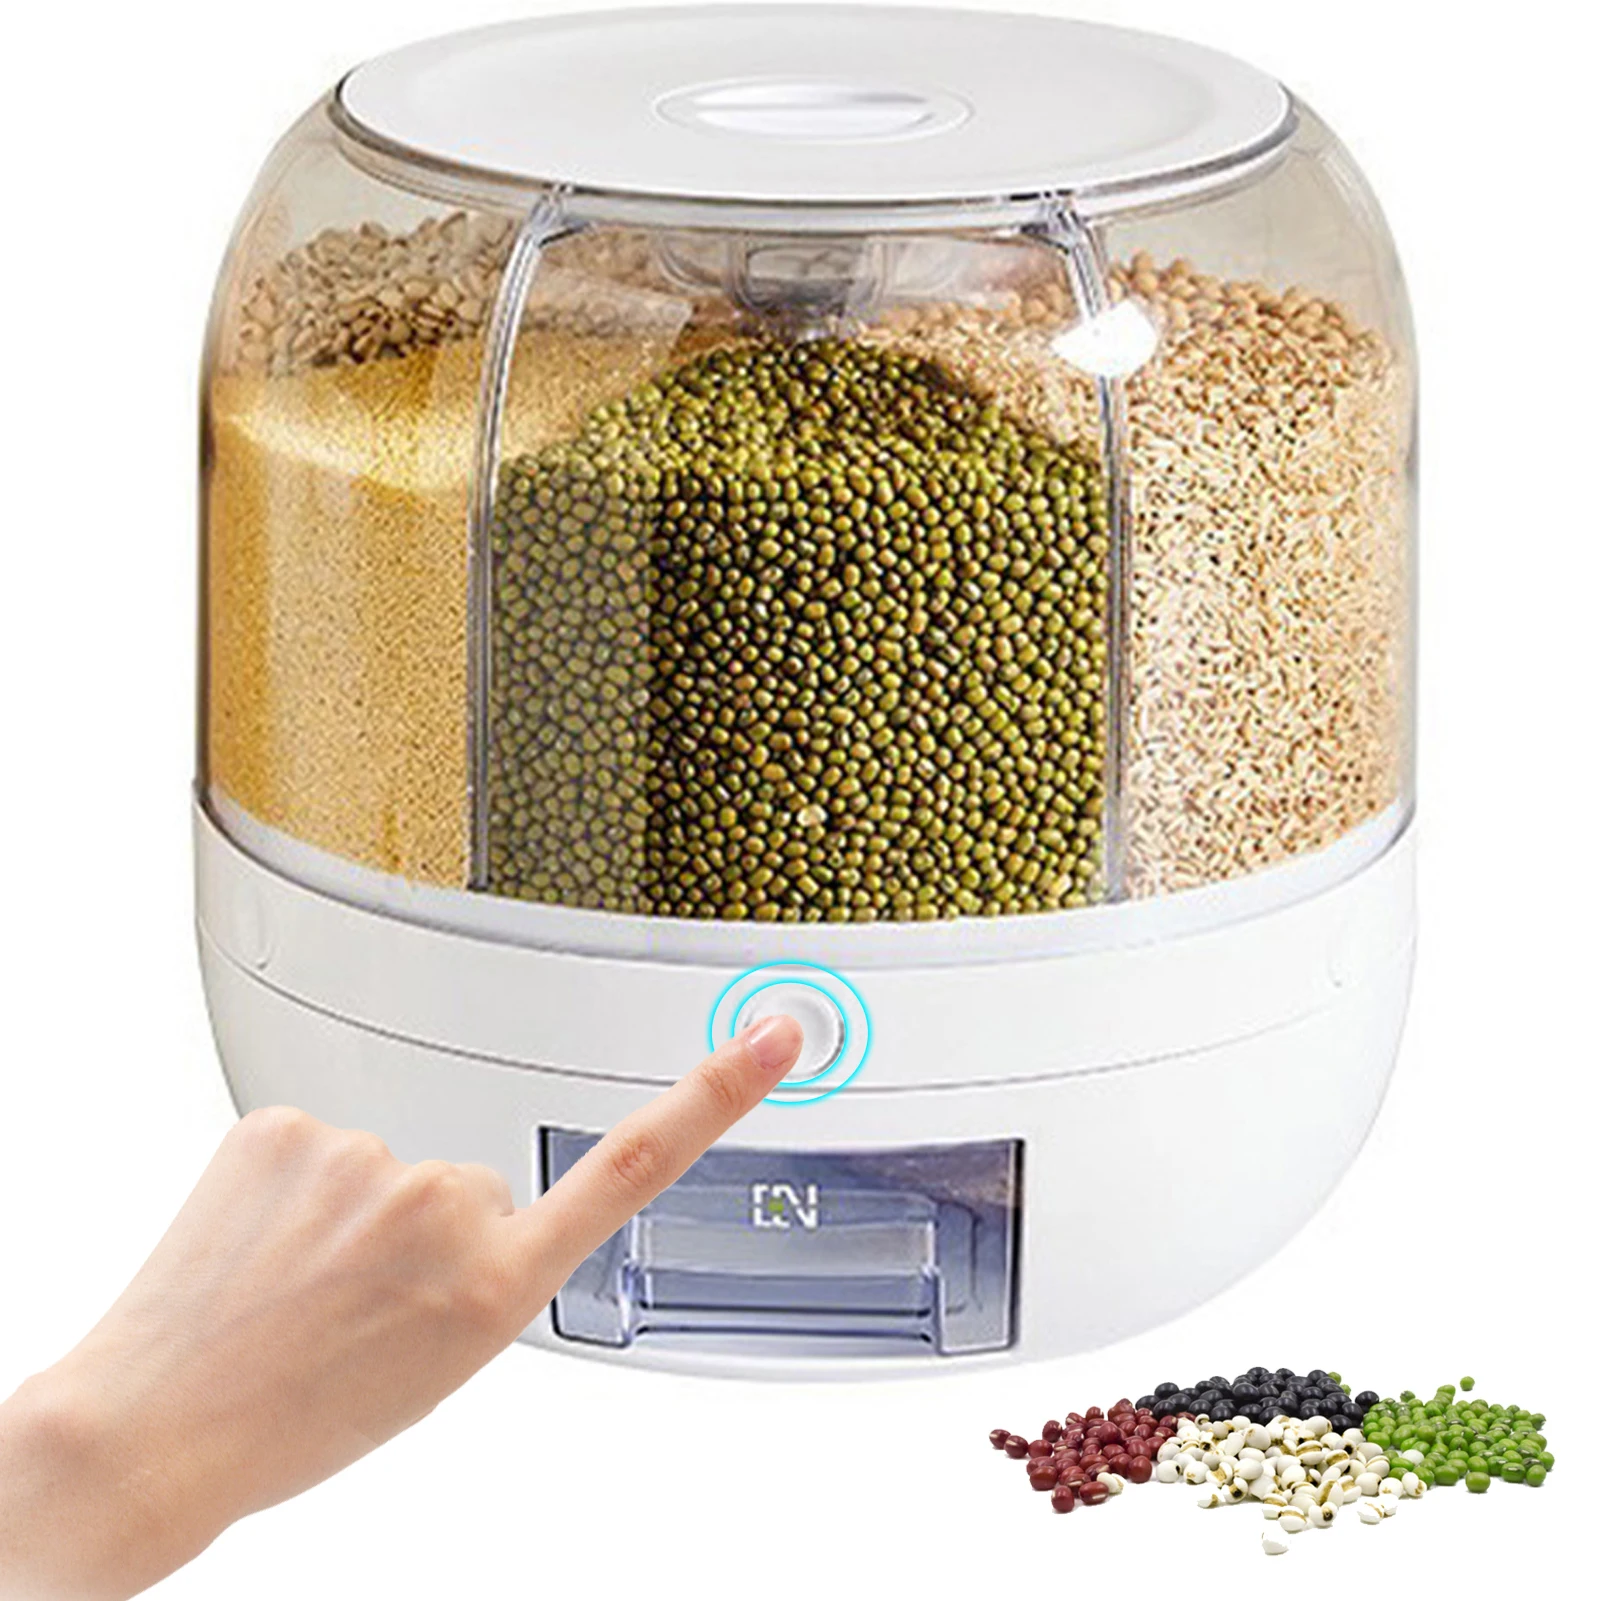 

Storage Box Sealed Food Dispenser Bucket Kitchen Rice Cereal With Lid Grain Round Dry Fruit 360 Rotating 6 Grid Home Beans